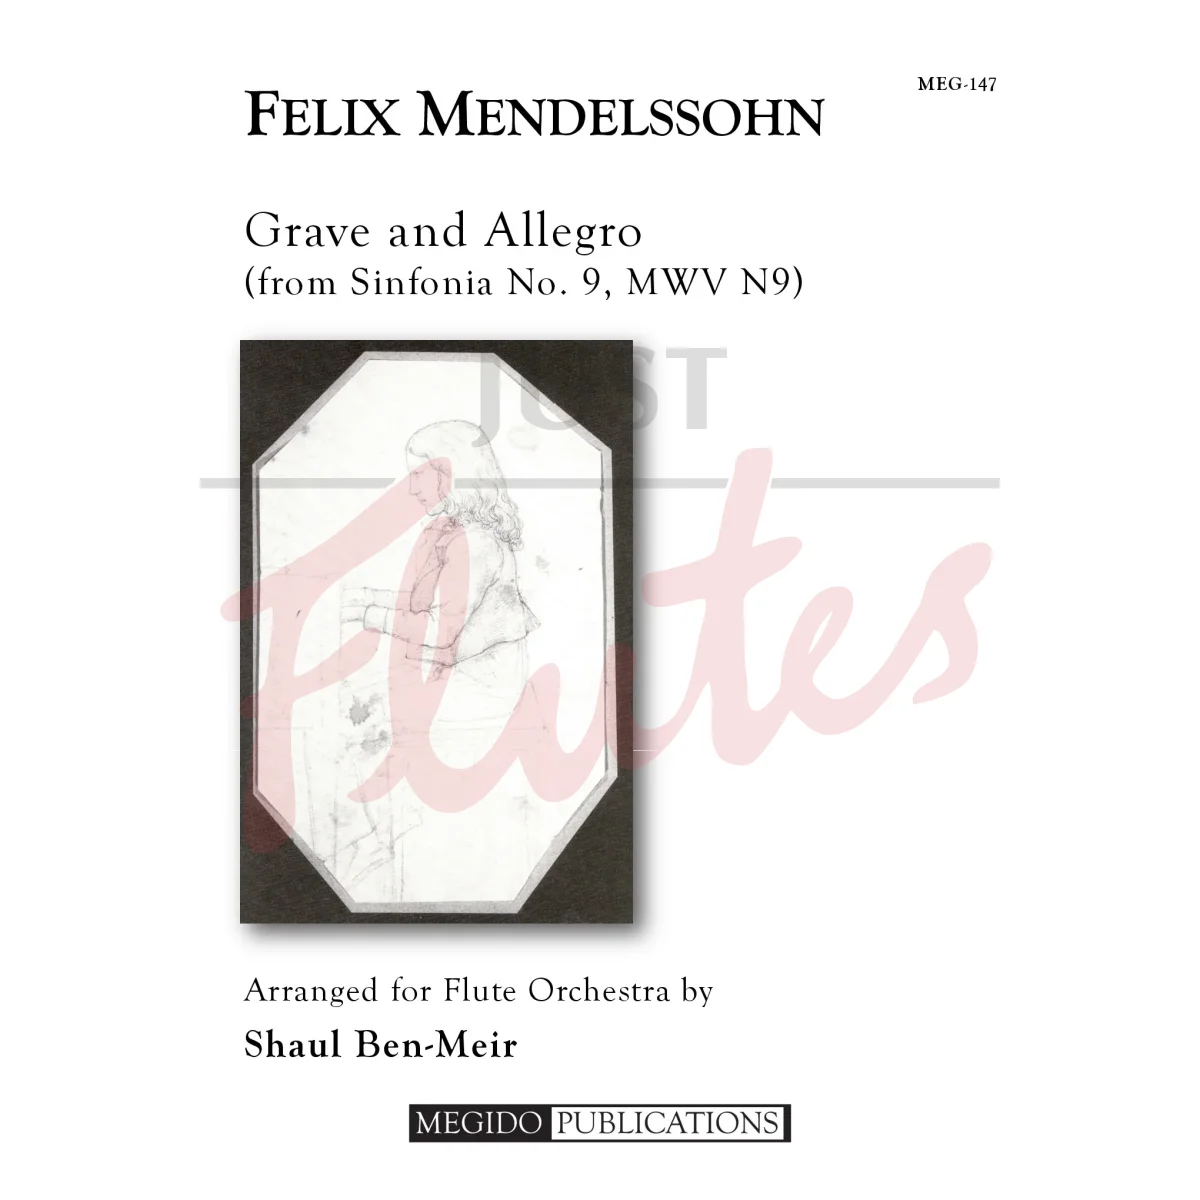 Grave and Allegro from Sinfonia No. 9 for Five Mixed Flutes